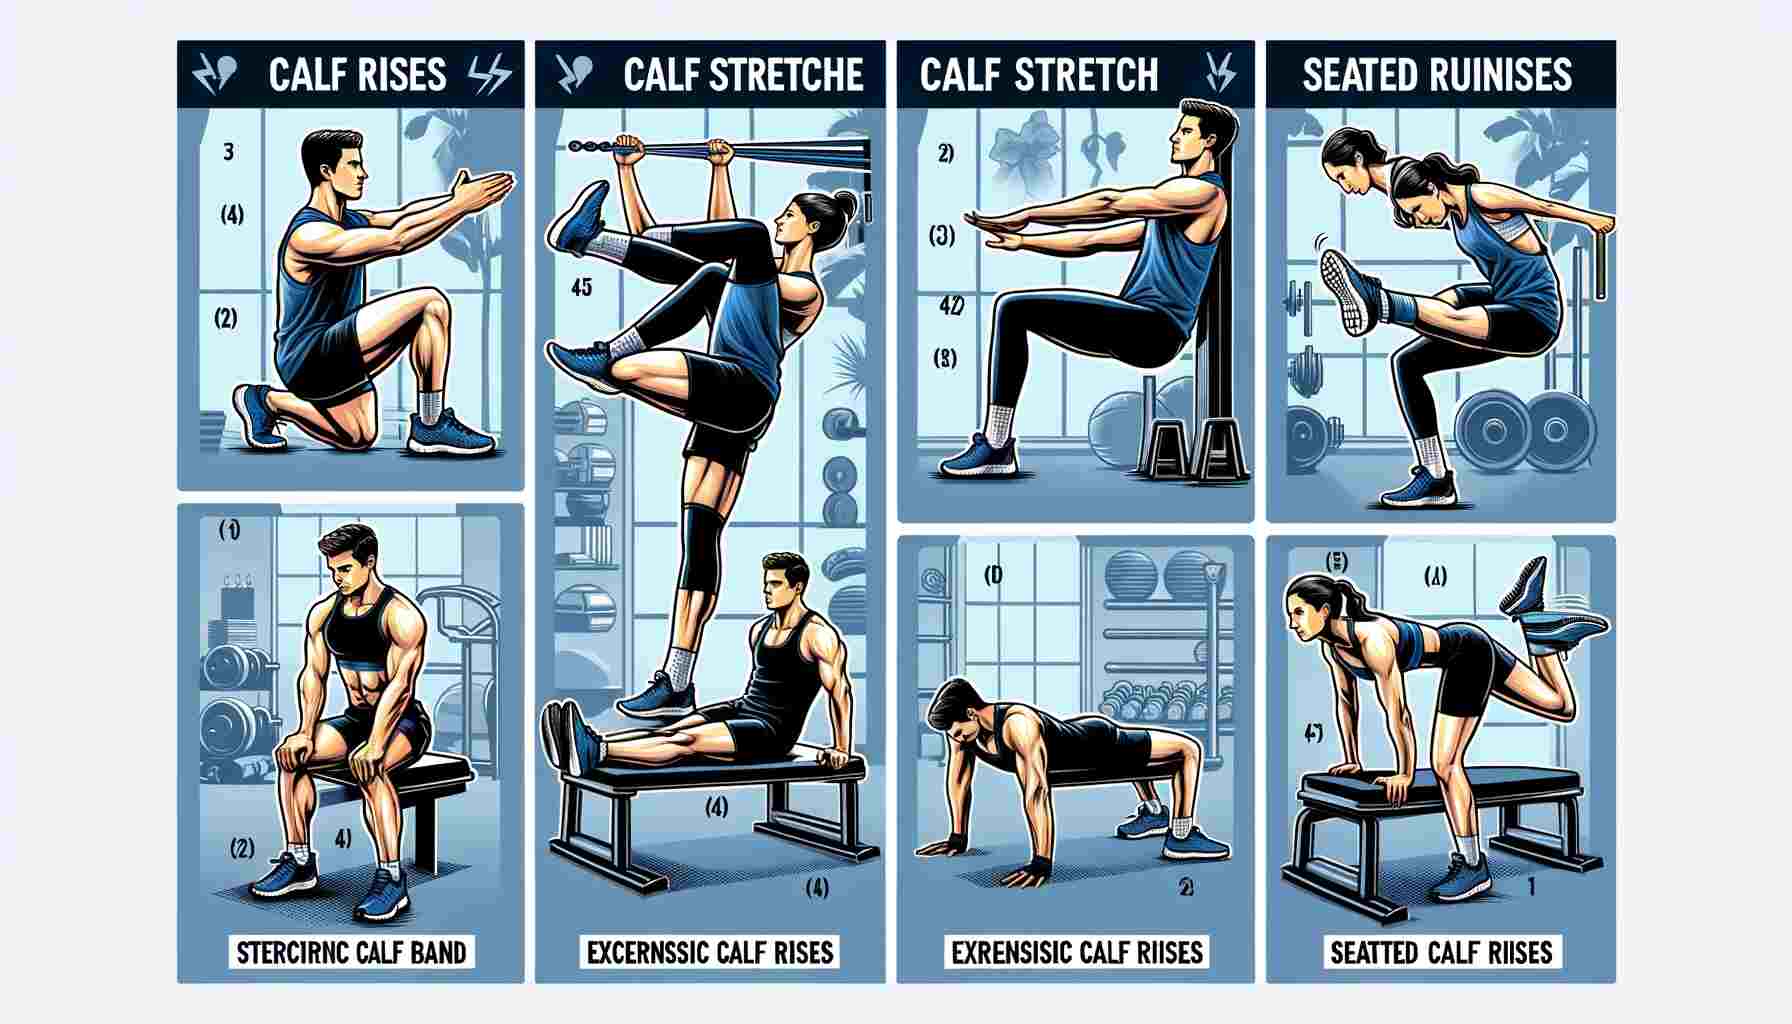 A detailed image for a fitness blog, illustrating four calf-strengthening exercises: 1) Calf Raises, showing a person standing and lifting their heels; 2) Calf Stretch with Resistance Band, depicting an individual sitting and stretching their calves using a band; 3) Eccentric Calf Raises, with a person standing on a step and lowering their heel; and 4) Seated Calf Raises, where a person is seated with a weight on their thighs, lifting their heels. Each exercise is clearly labeled and demonstrated in a gym or home workout environment, emphasizing fitness and health.